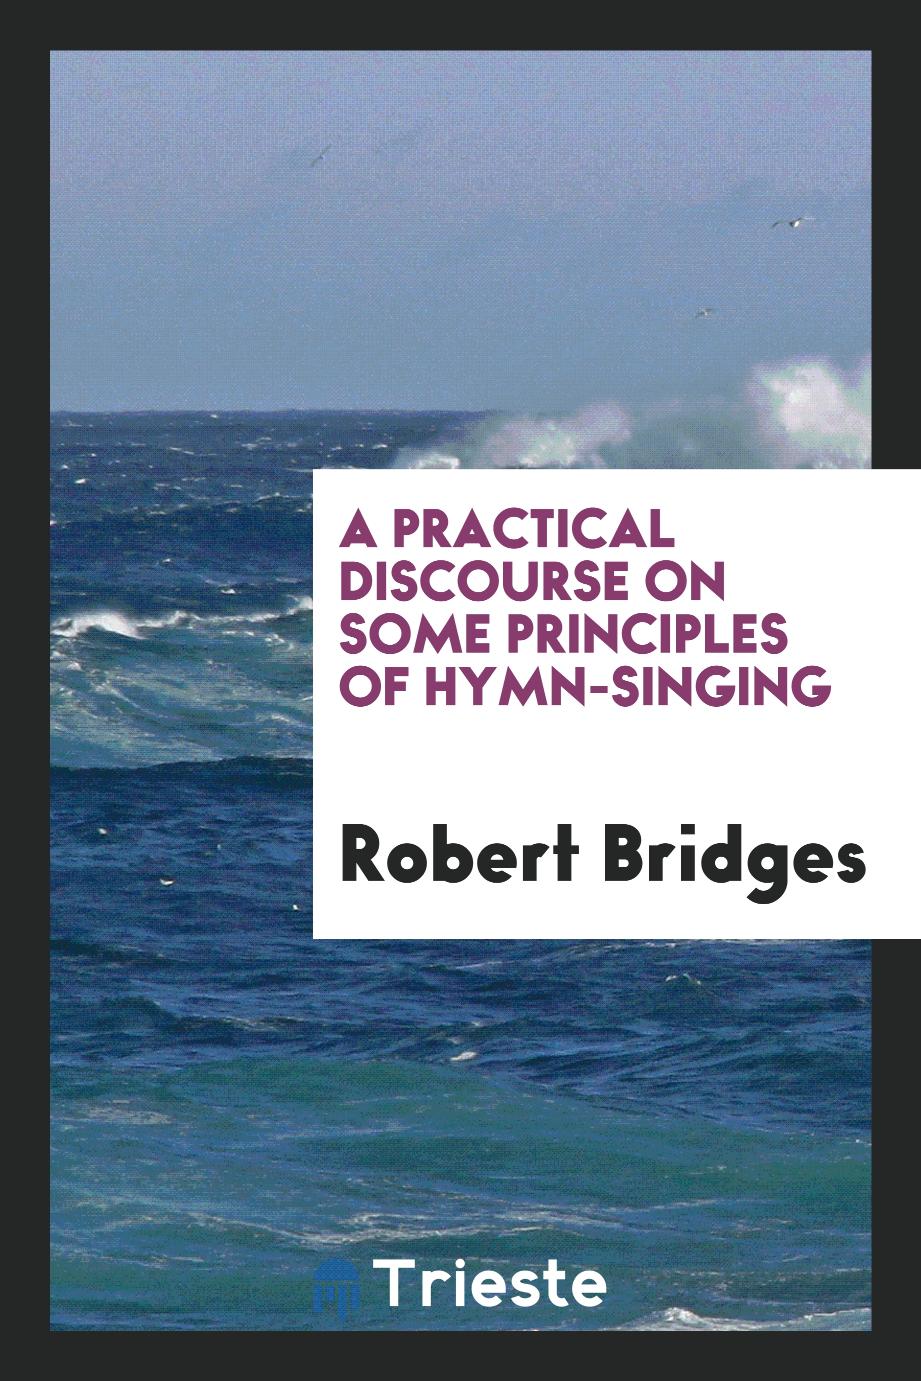 A Practical Discourse on Some Principles of Hymn-singing